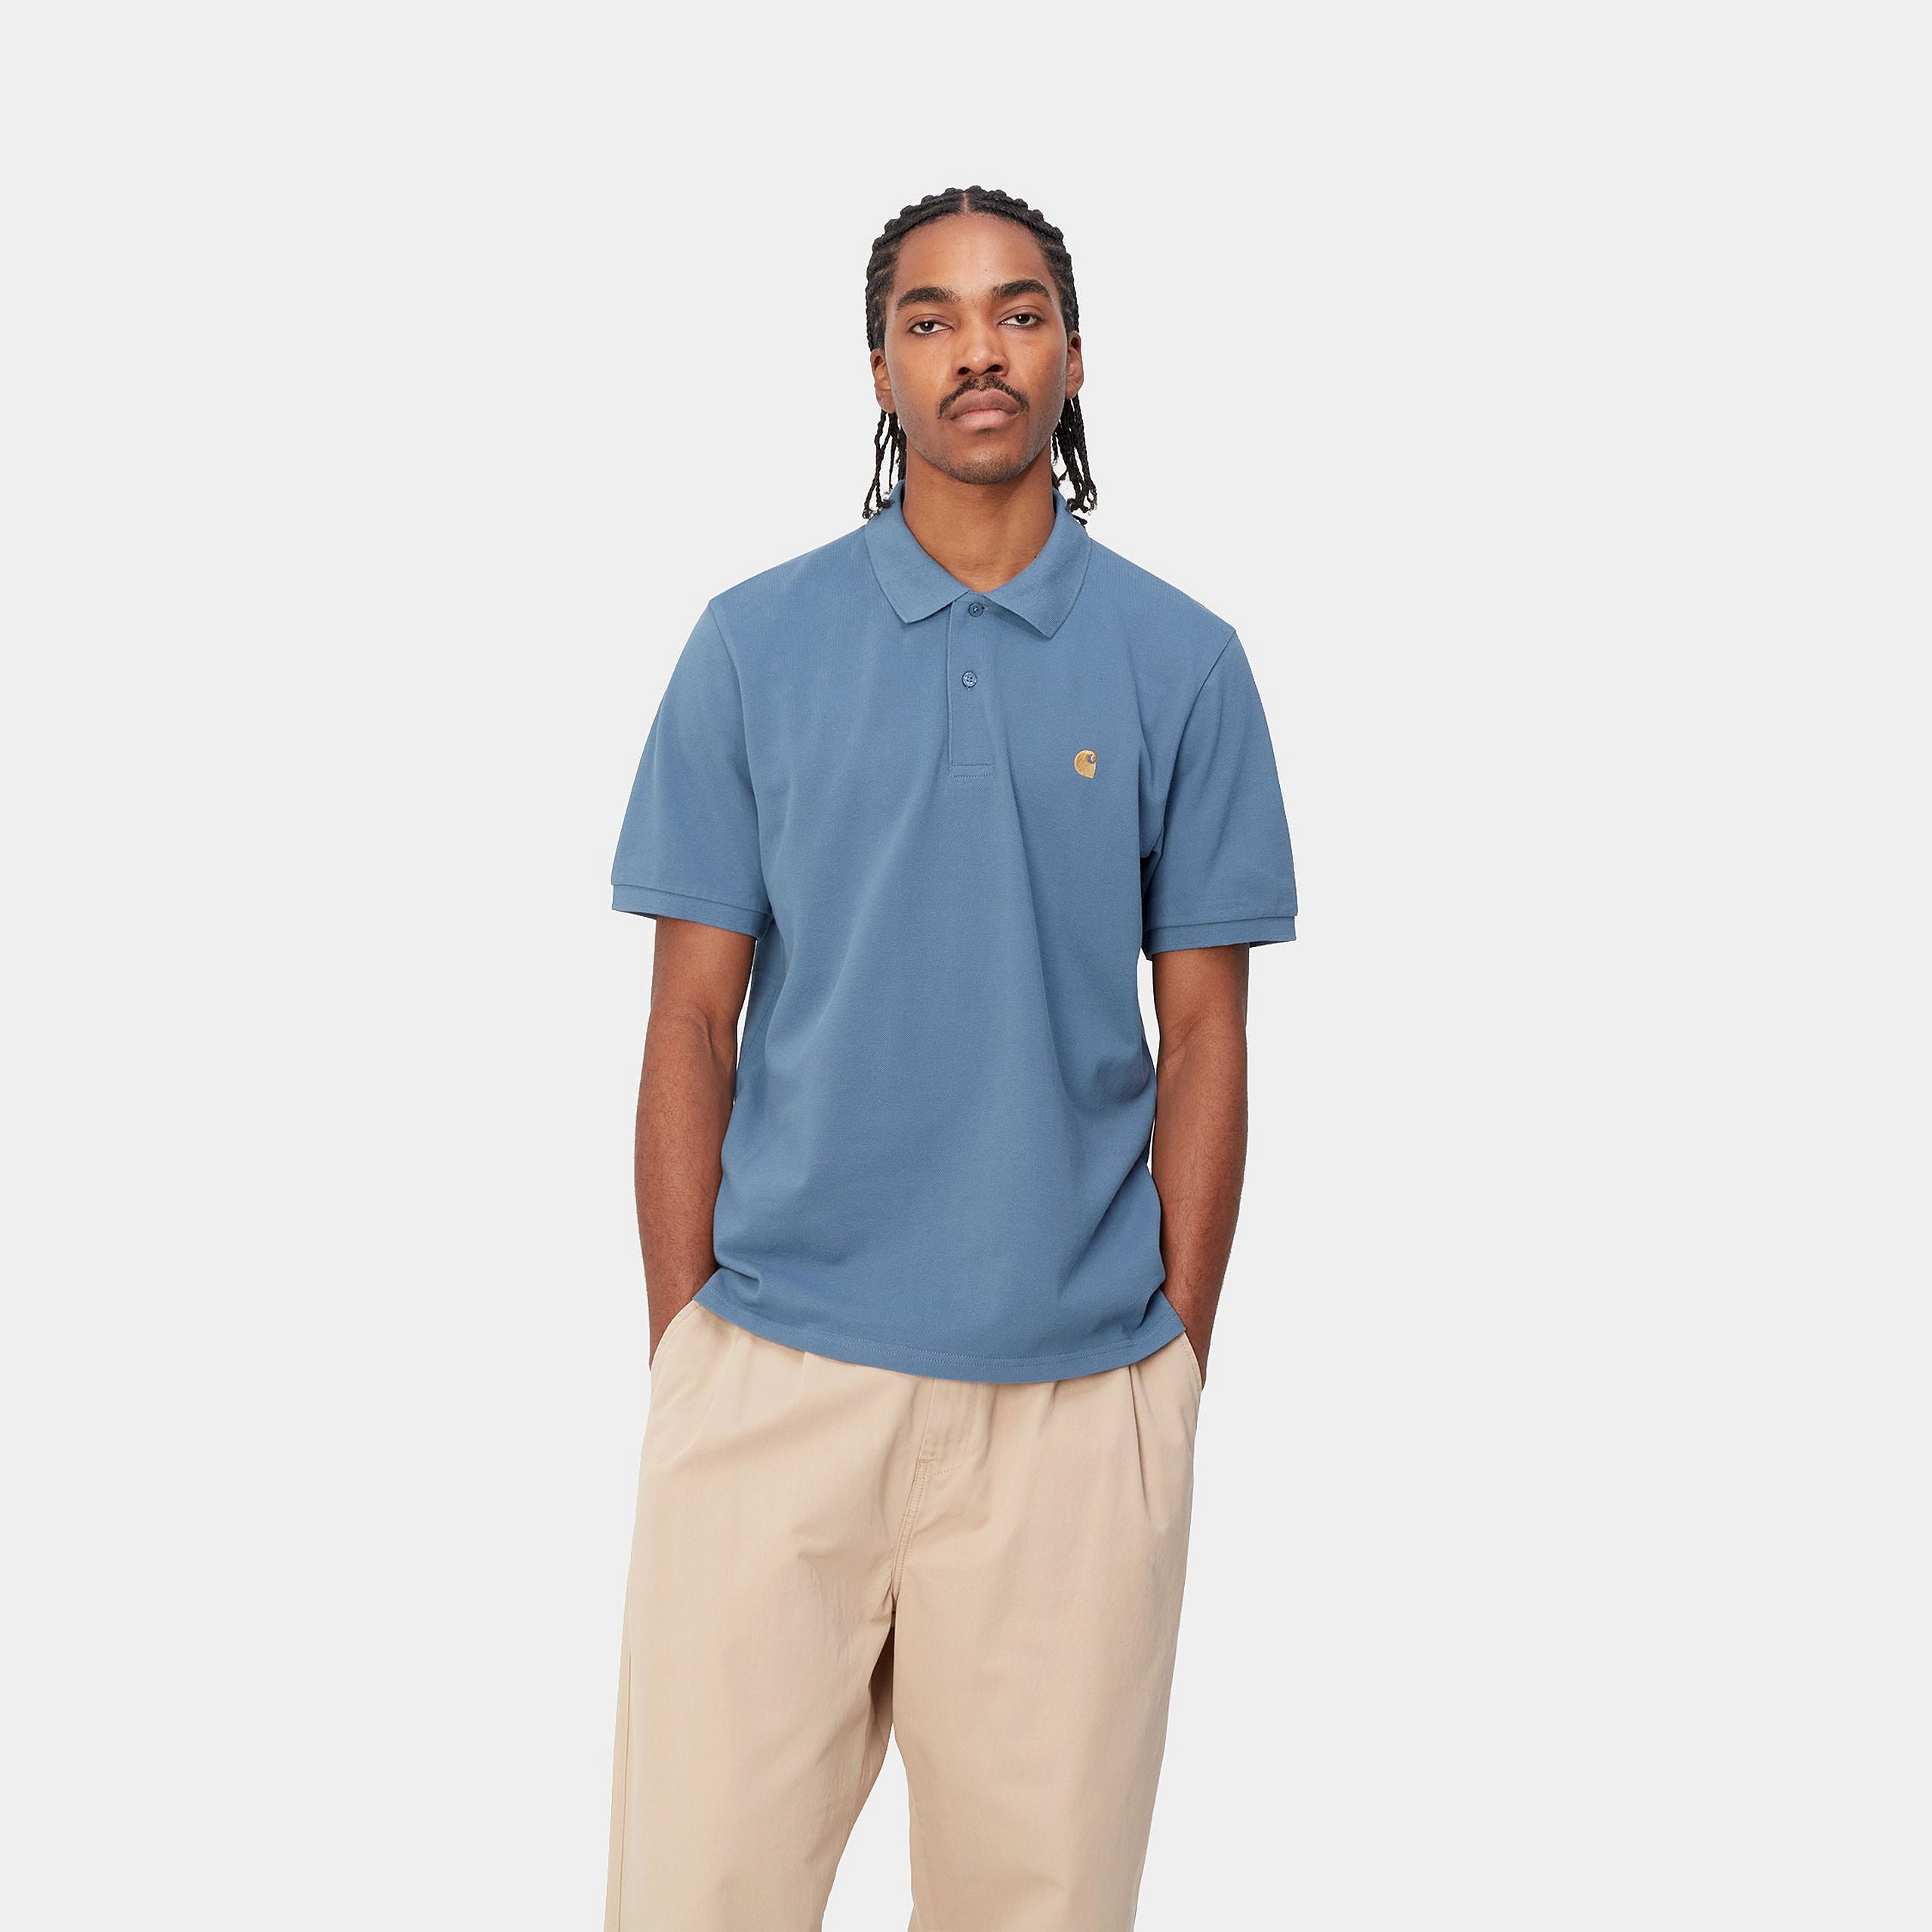 S/S CHASE PIQUE POLO - Sorrent / Gold